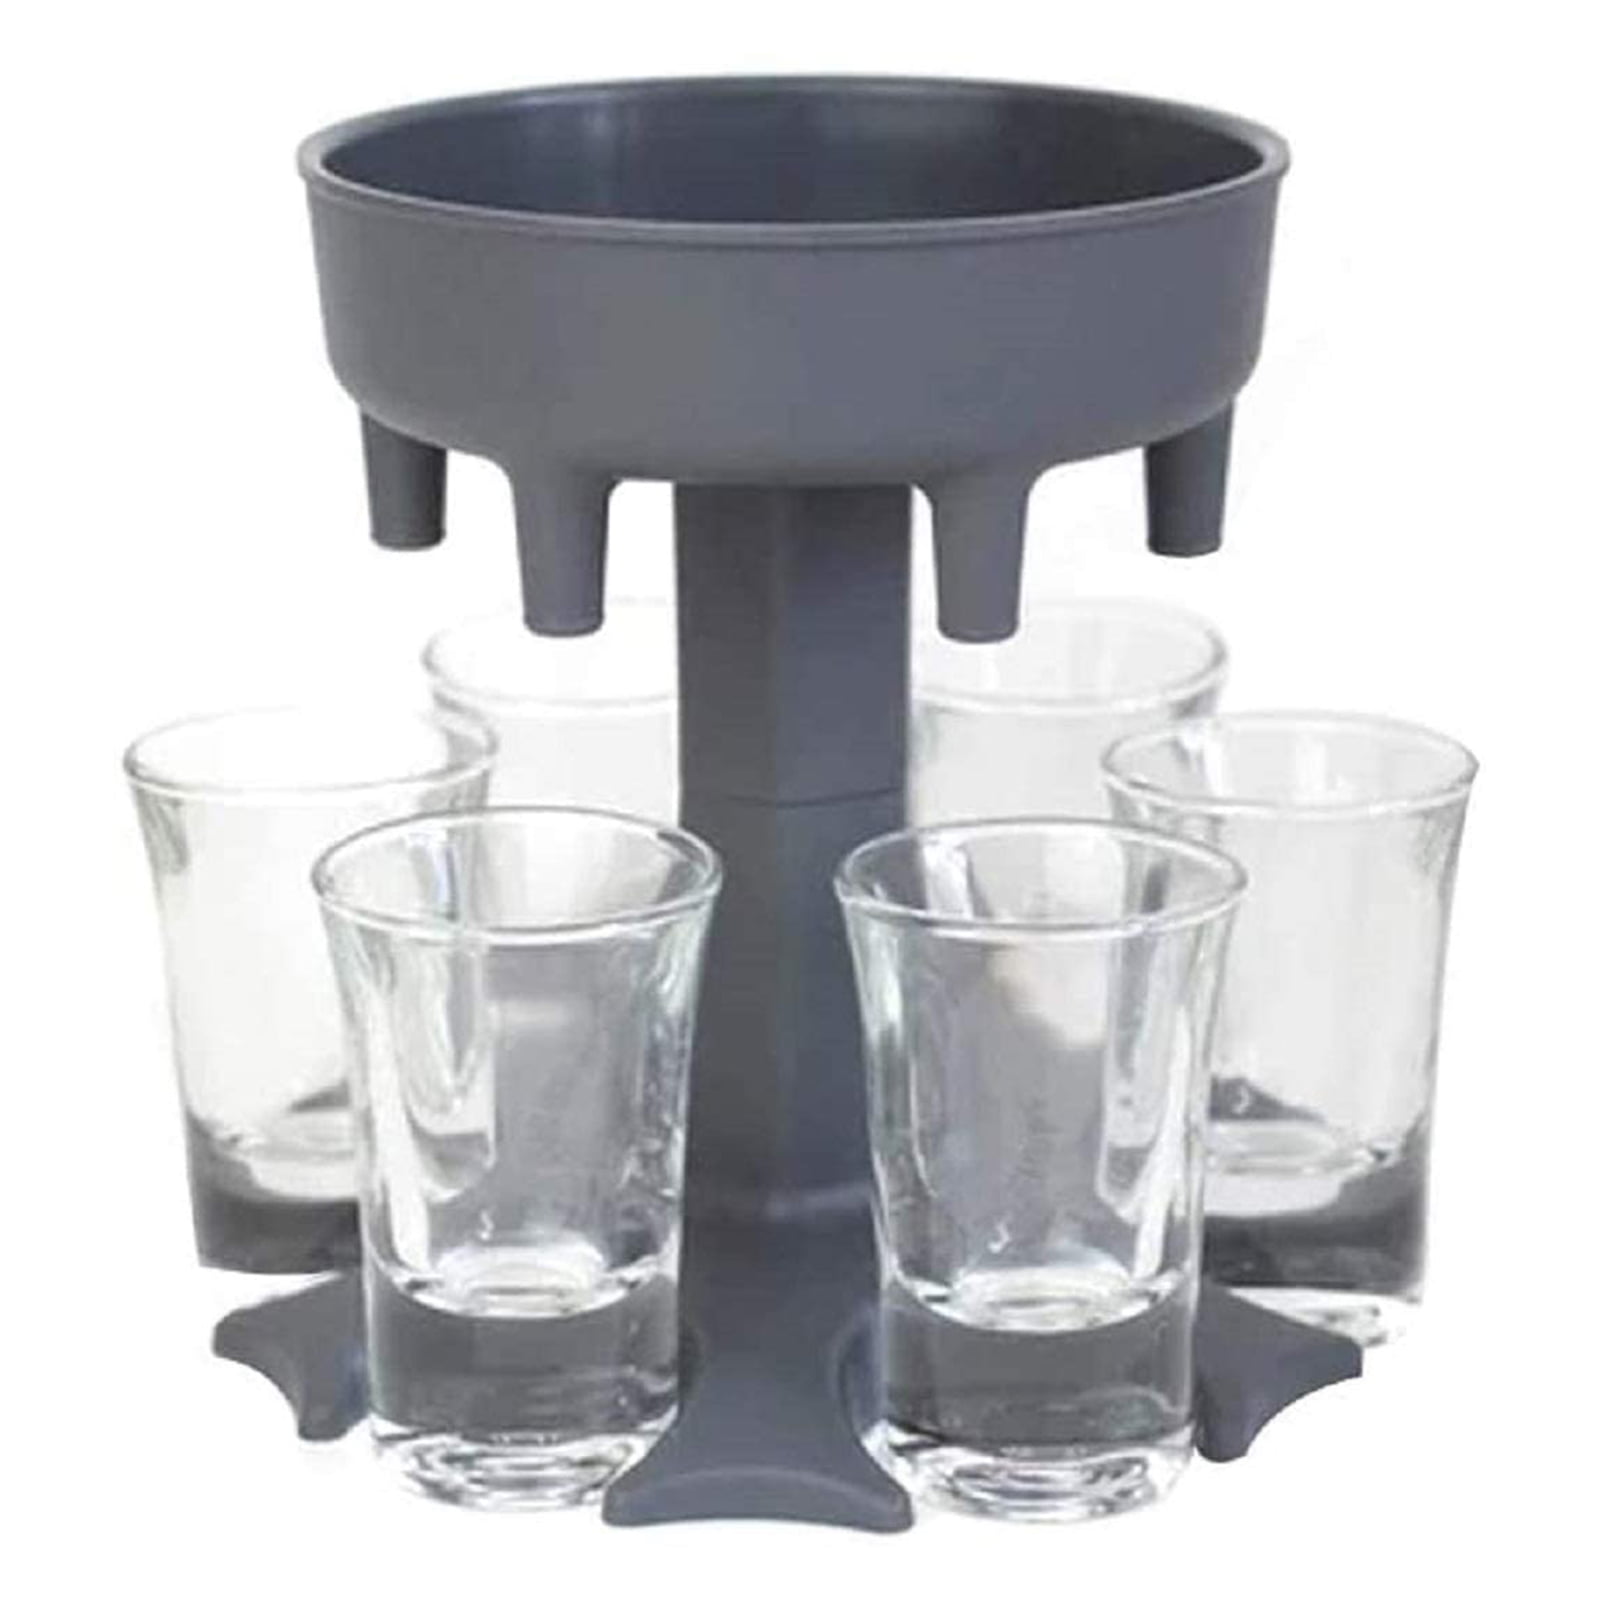 Gray 6 Shot Glass Dispenser and Holder,Drinking Games for Cocktail Party Get Togethers,Beer and Wine Separator,Liquor Dispenser Gifts 